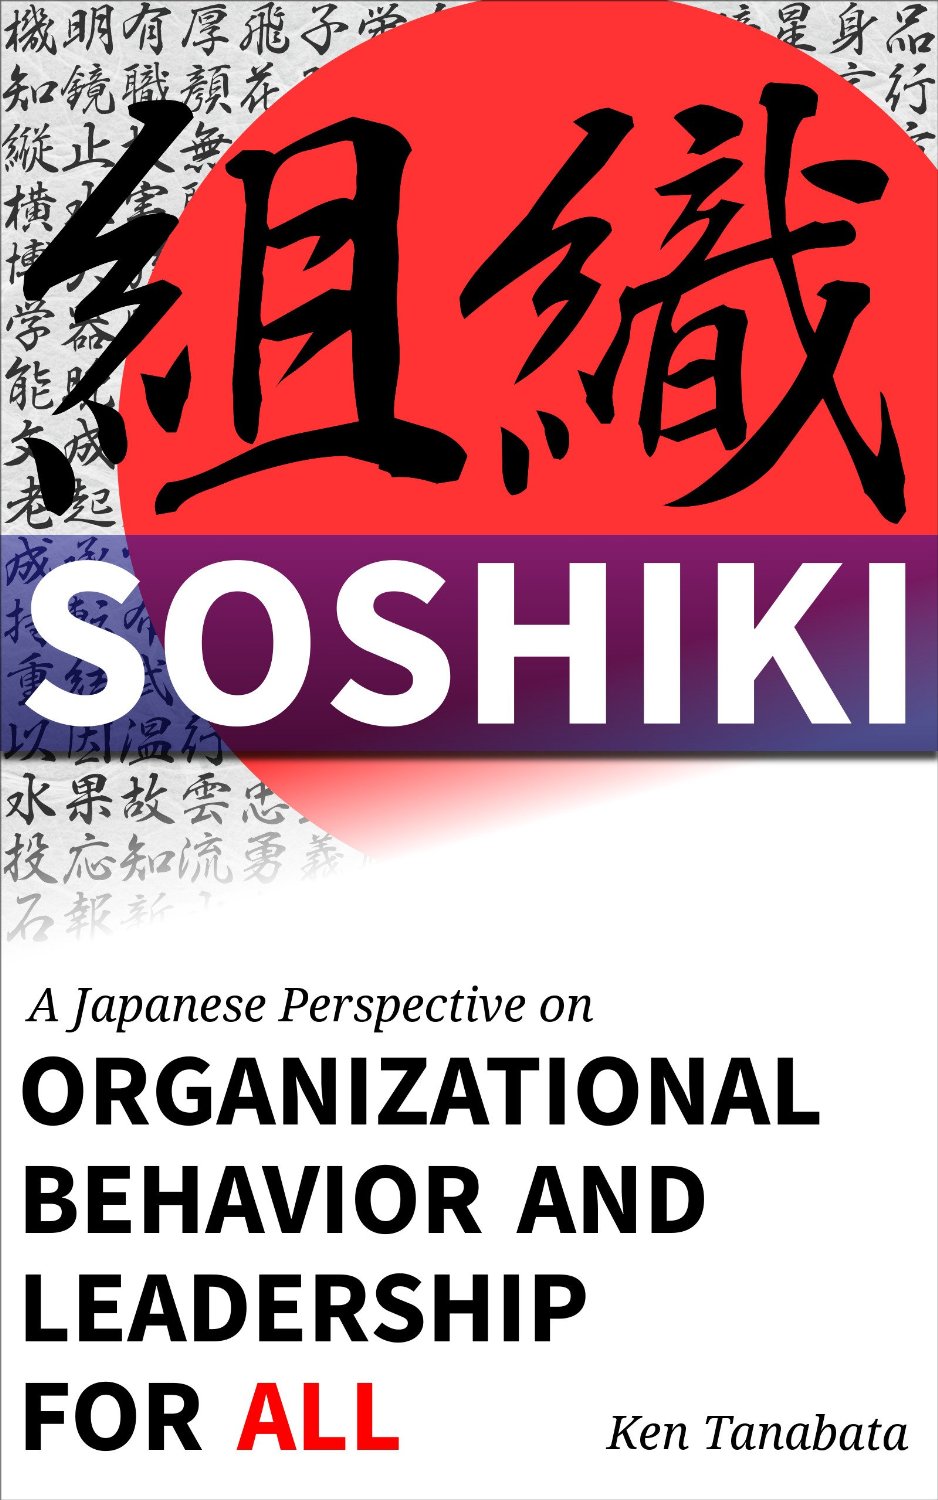 Soshiki: A Japanese Perspective on Organizational Behavior and Leadership for All by Ken Tanabata